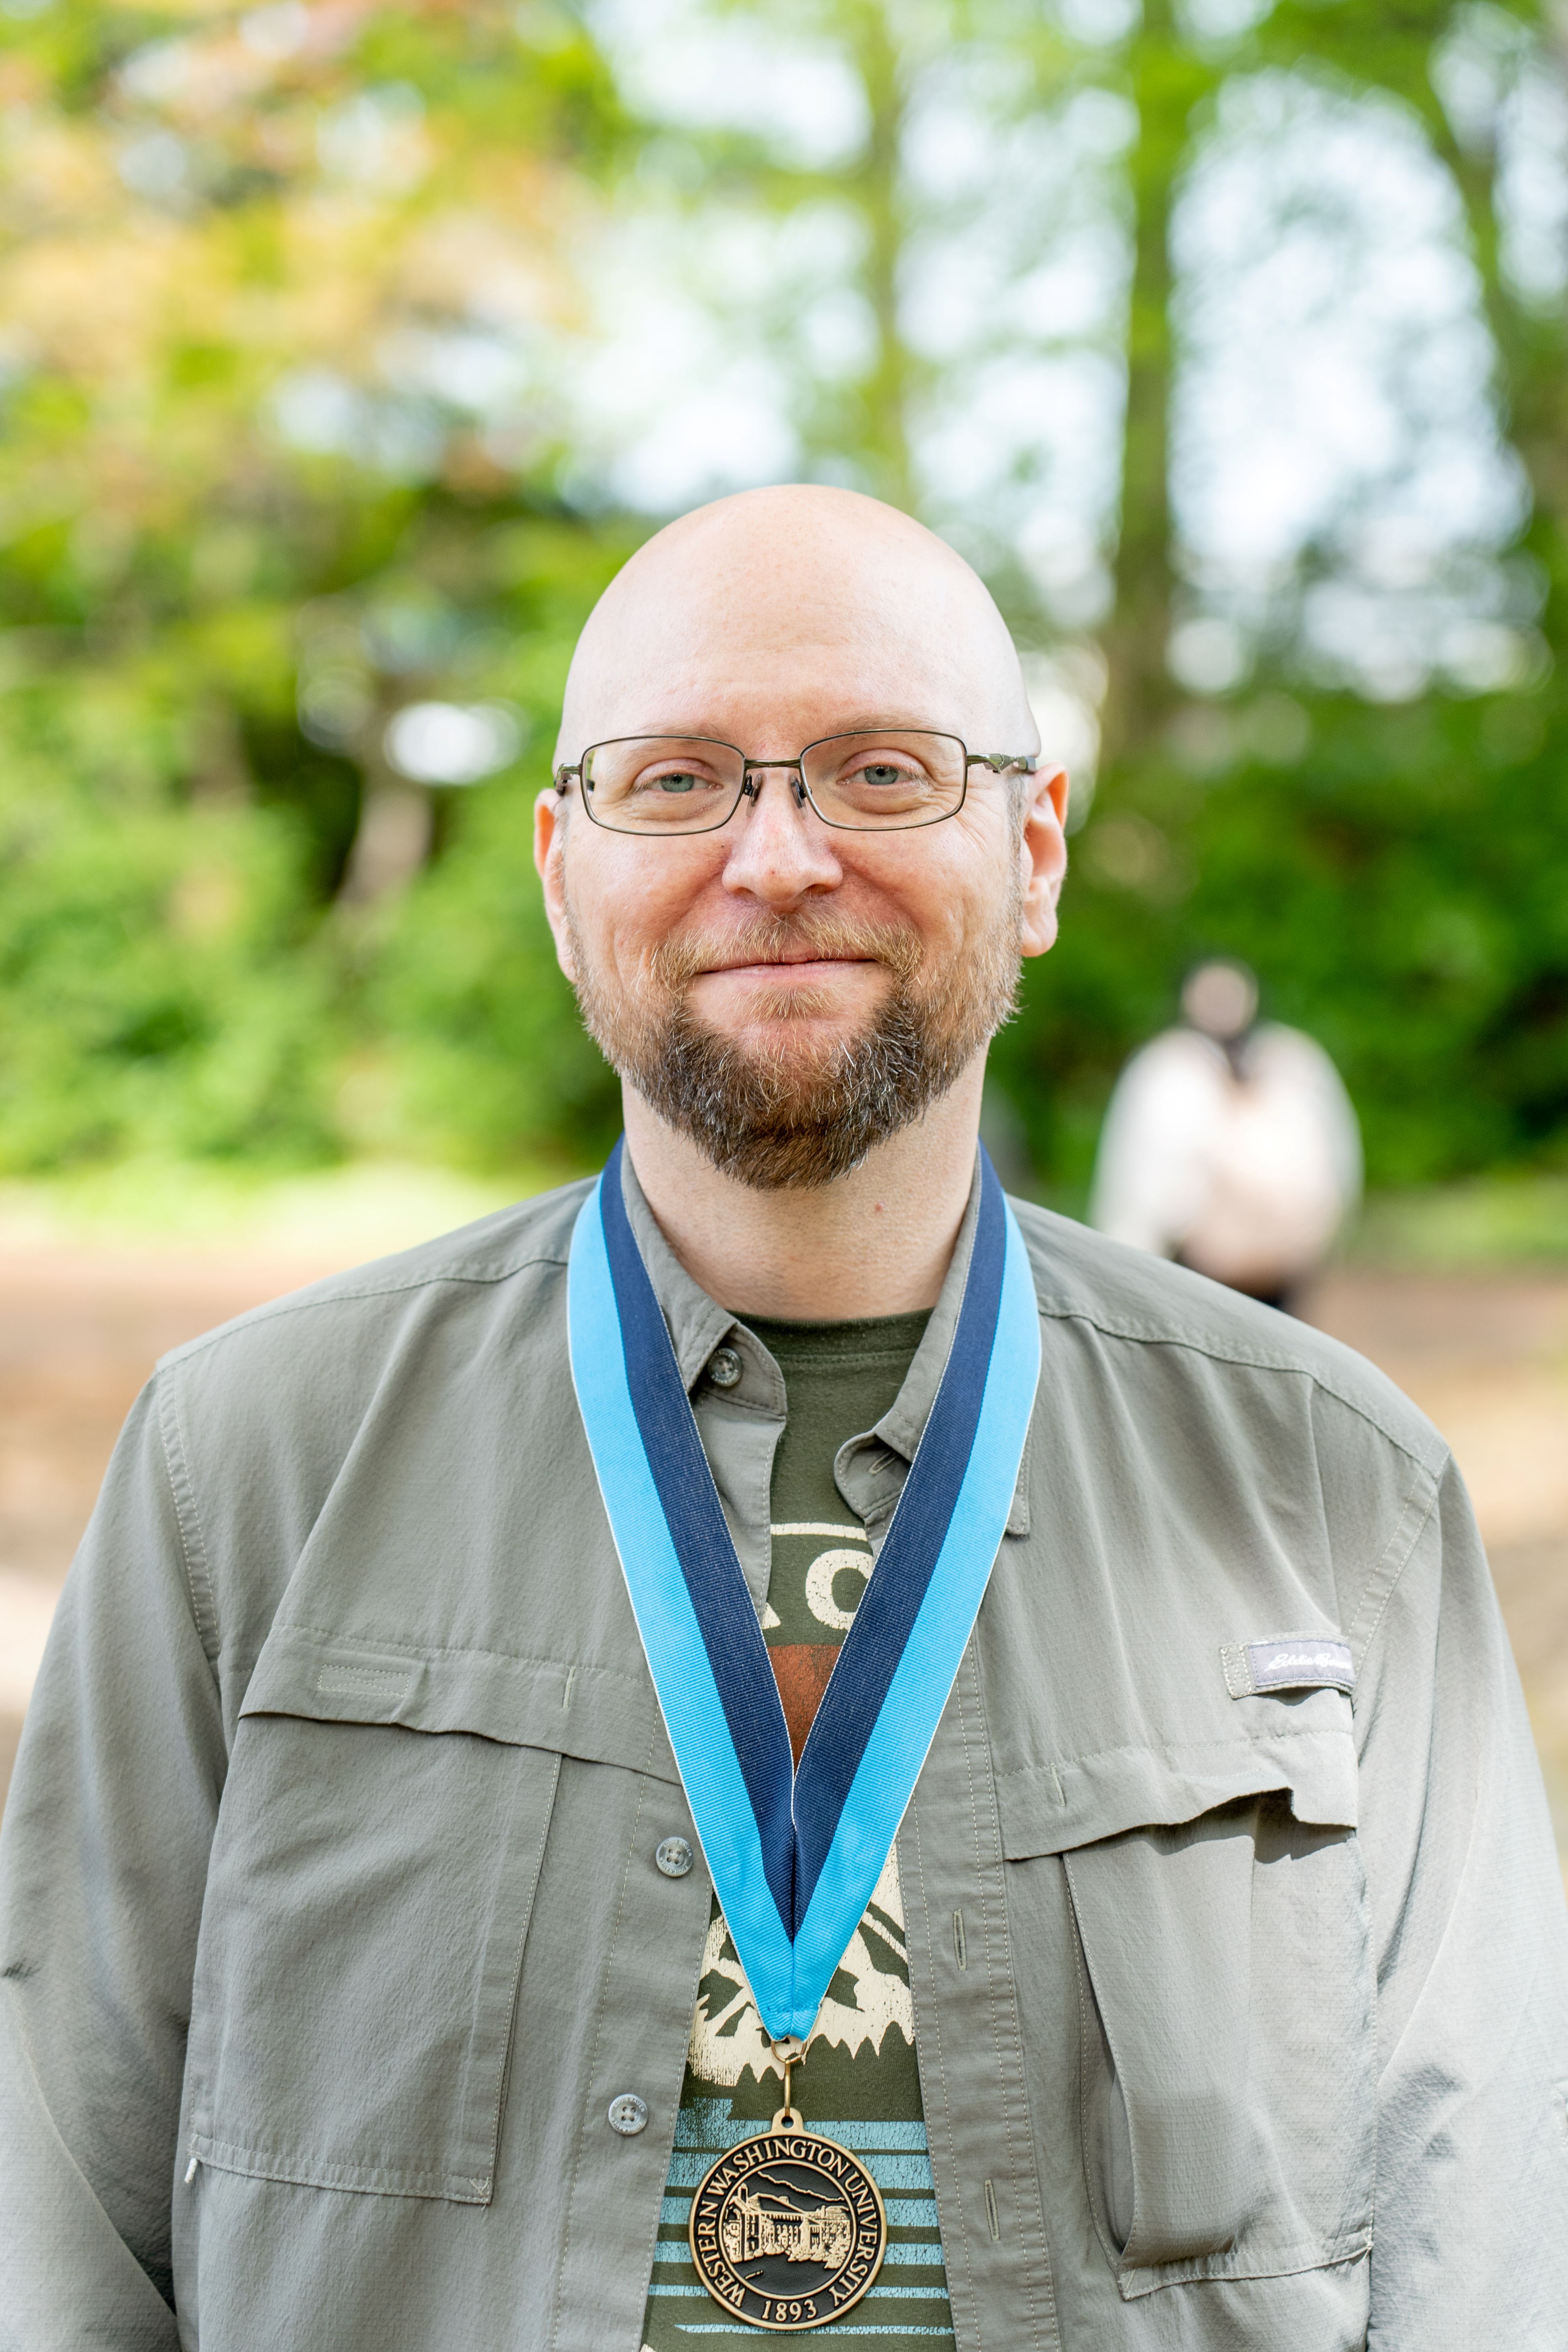 Zach McGrew smiling and wearing a WWU medallion award on a neck ribbon with trees in the background